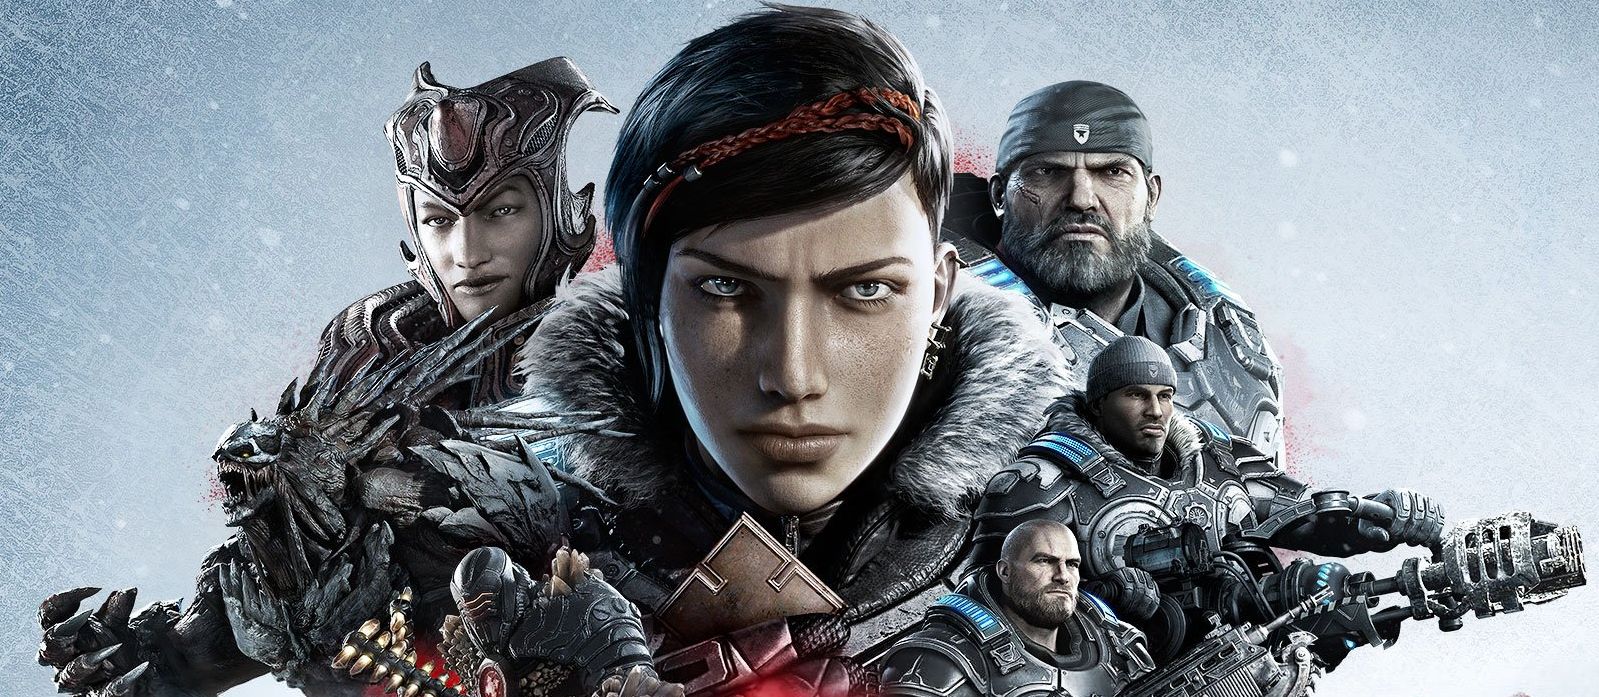 Image for Gears 5 never featured any smoking as a result of Rod Fergusson's desire not to glamorise it